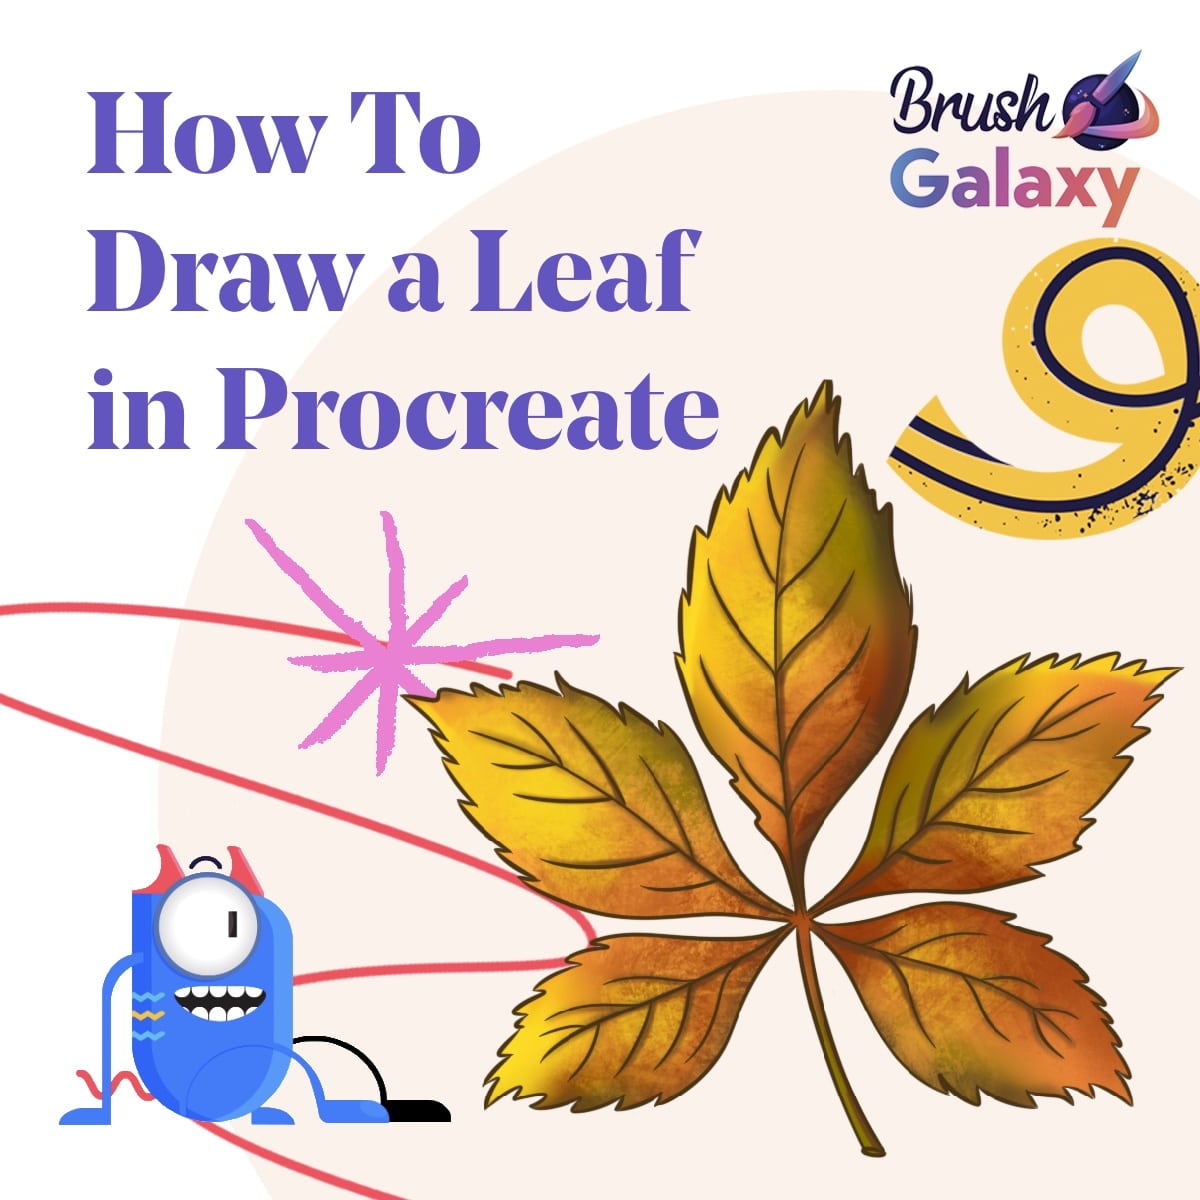 How to Draw a Leaf in Procreate